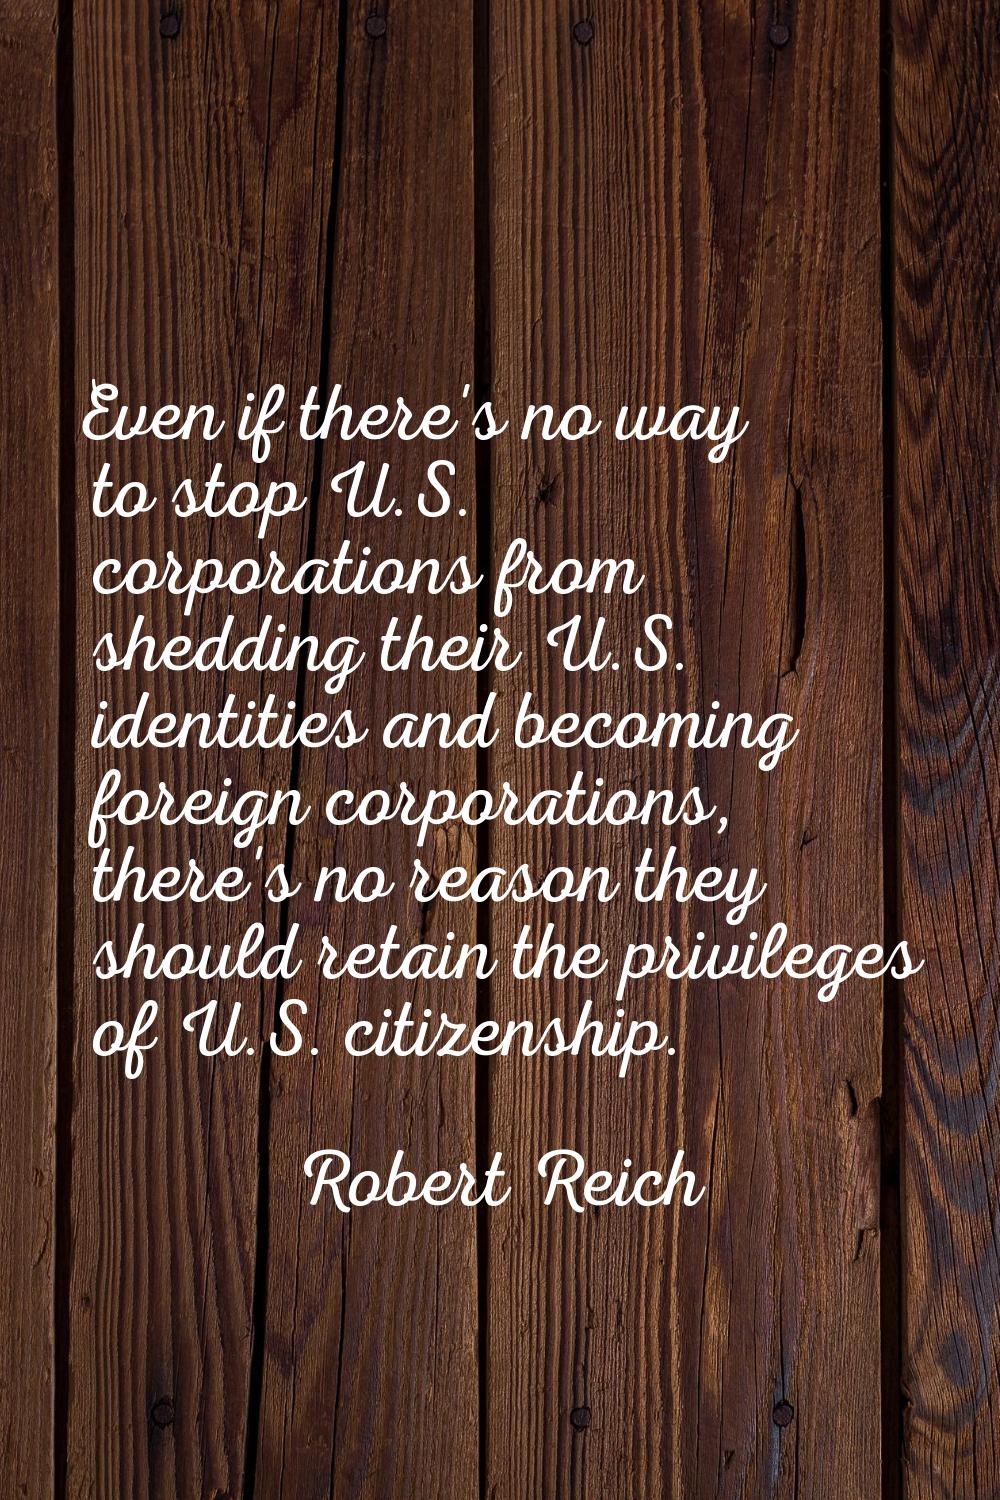 Even if there's no way to stop U.S. corporations from shedding their U.S. identities and becoming f